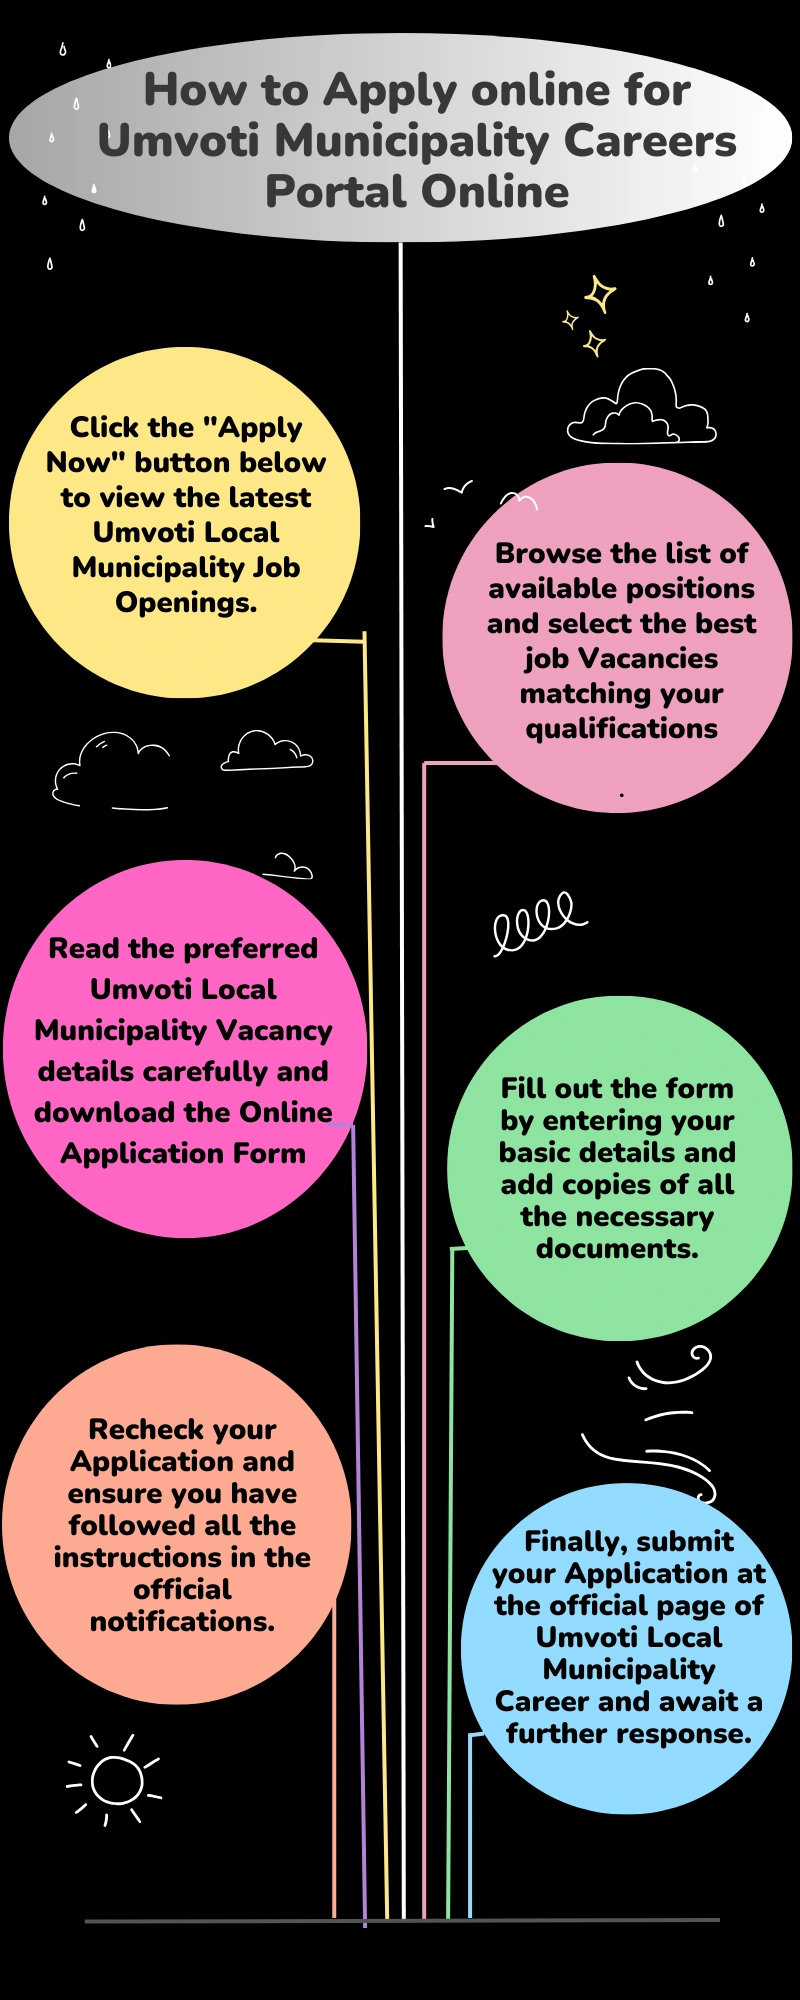 How to Apply online for Umvoti Municipality Careers Portal Online